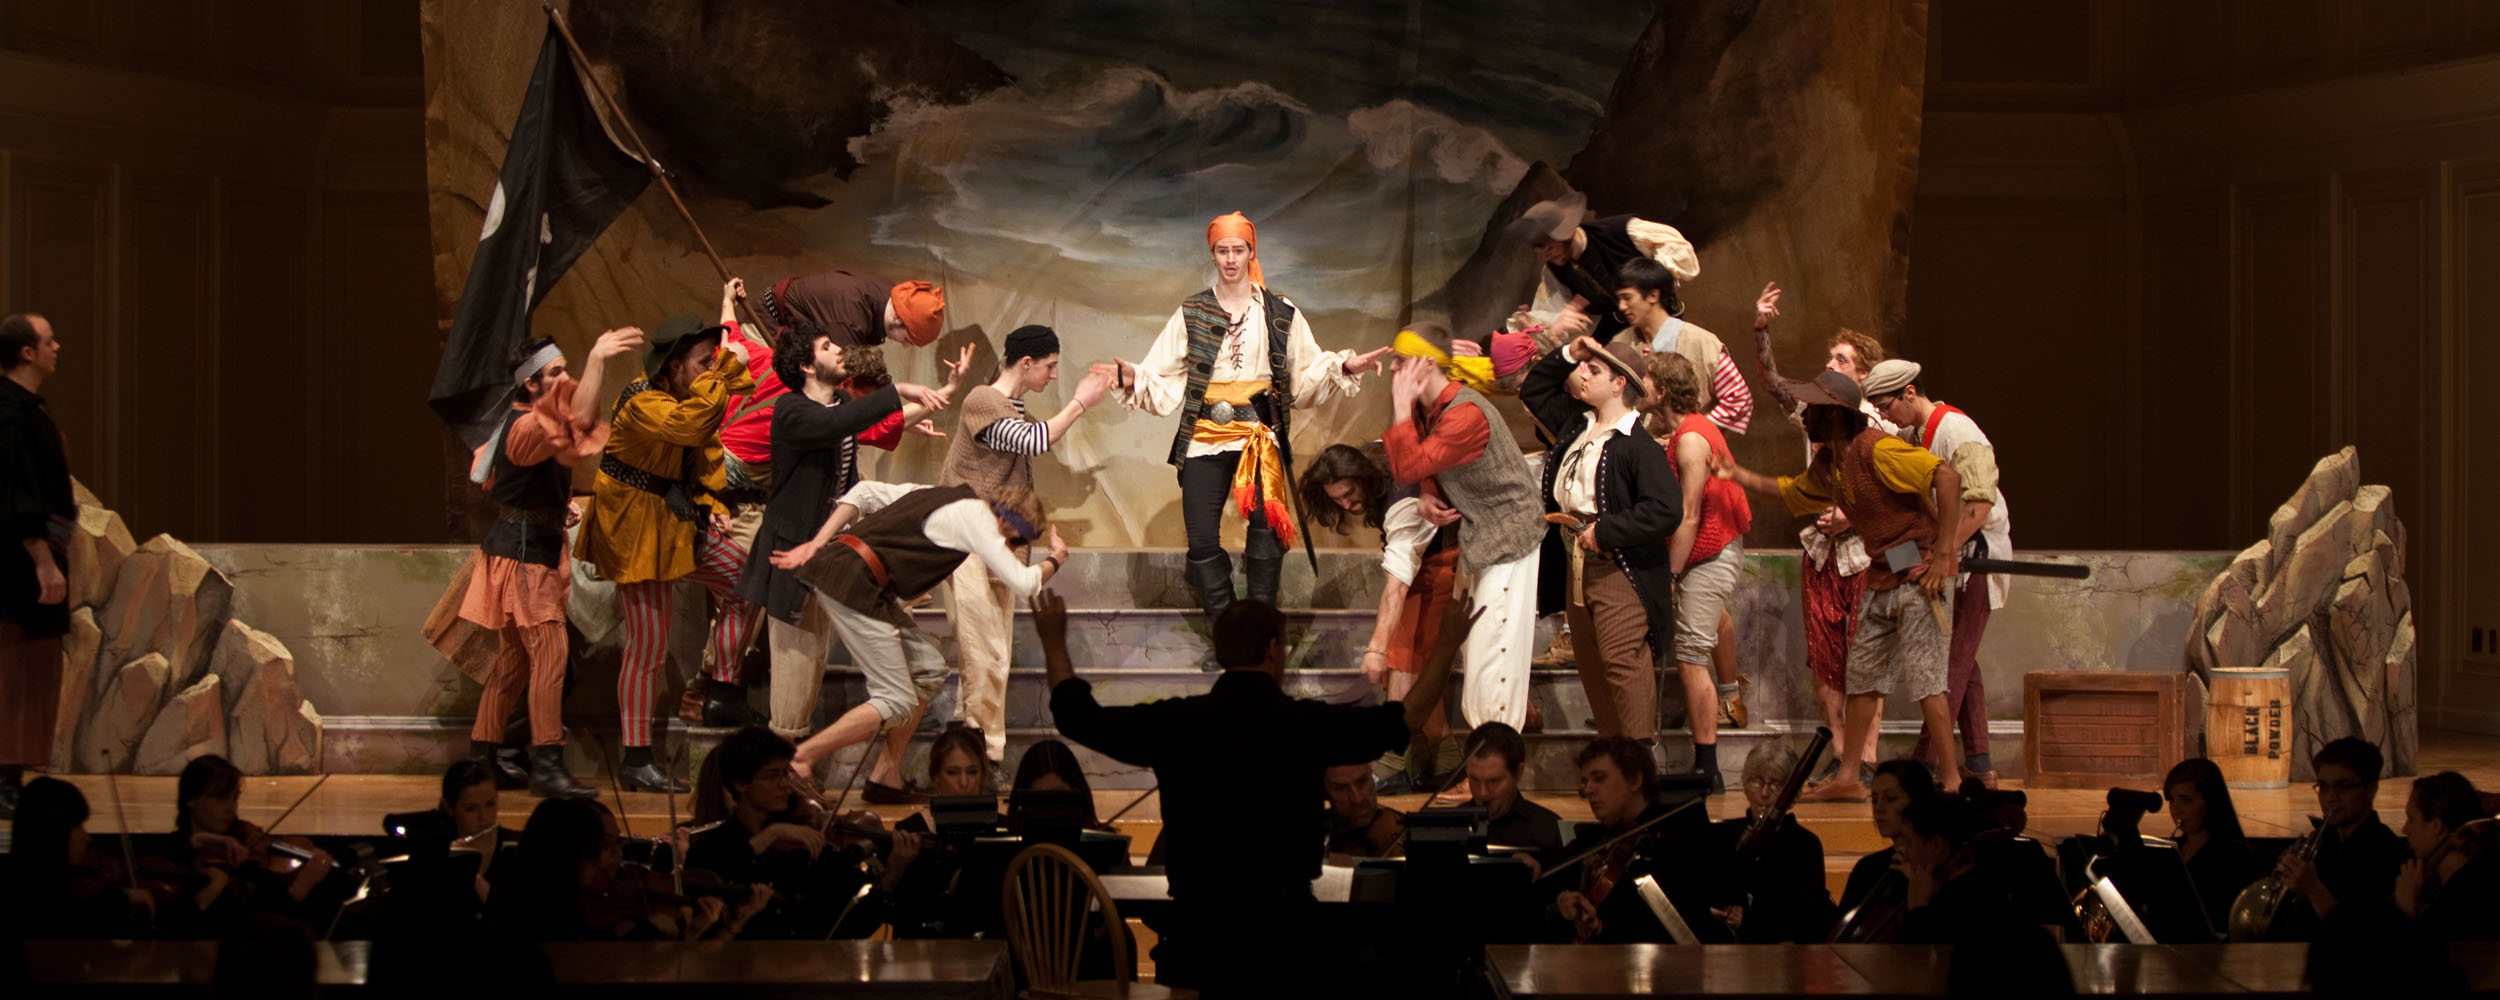 musical production of Pirates of the Penzance